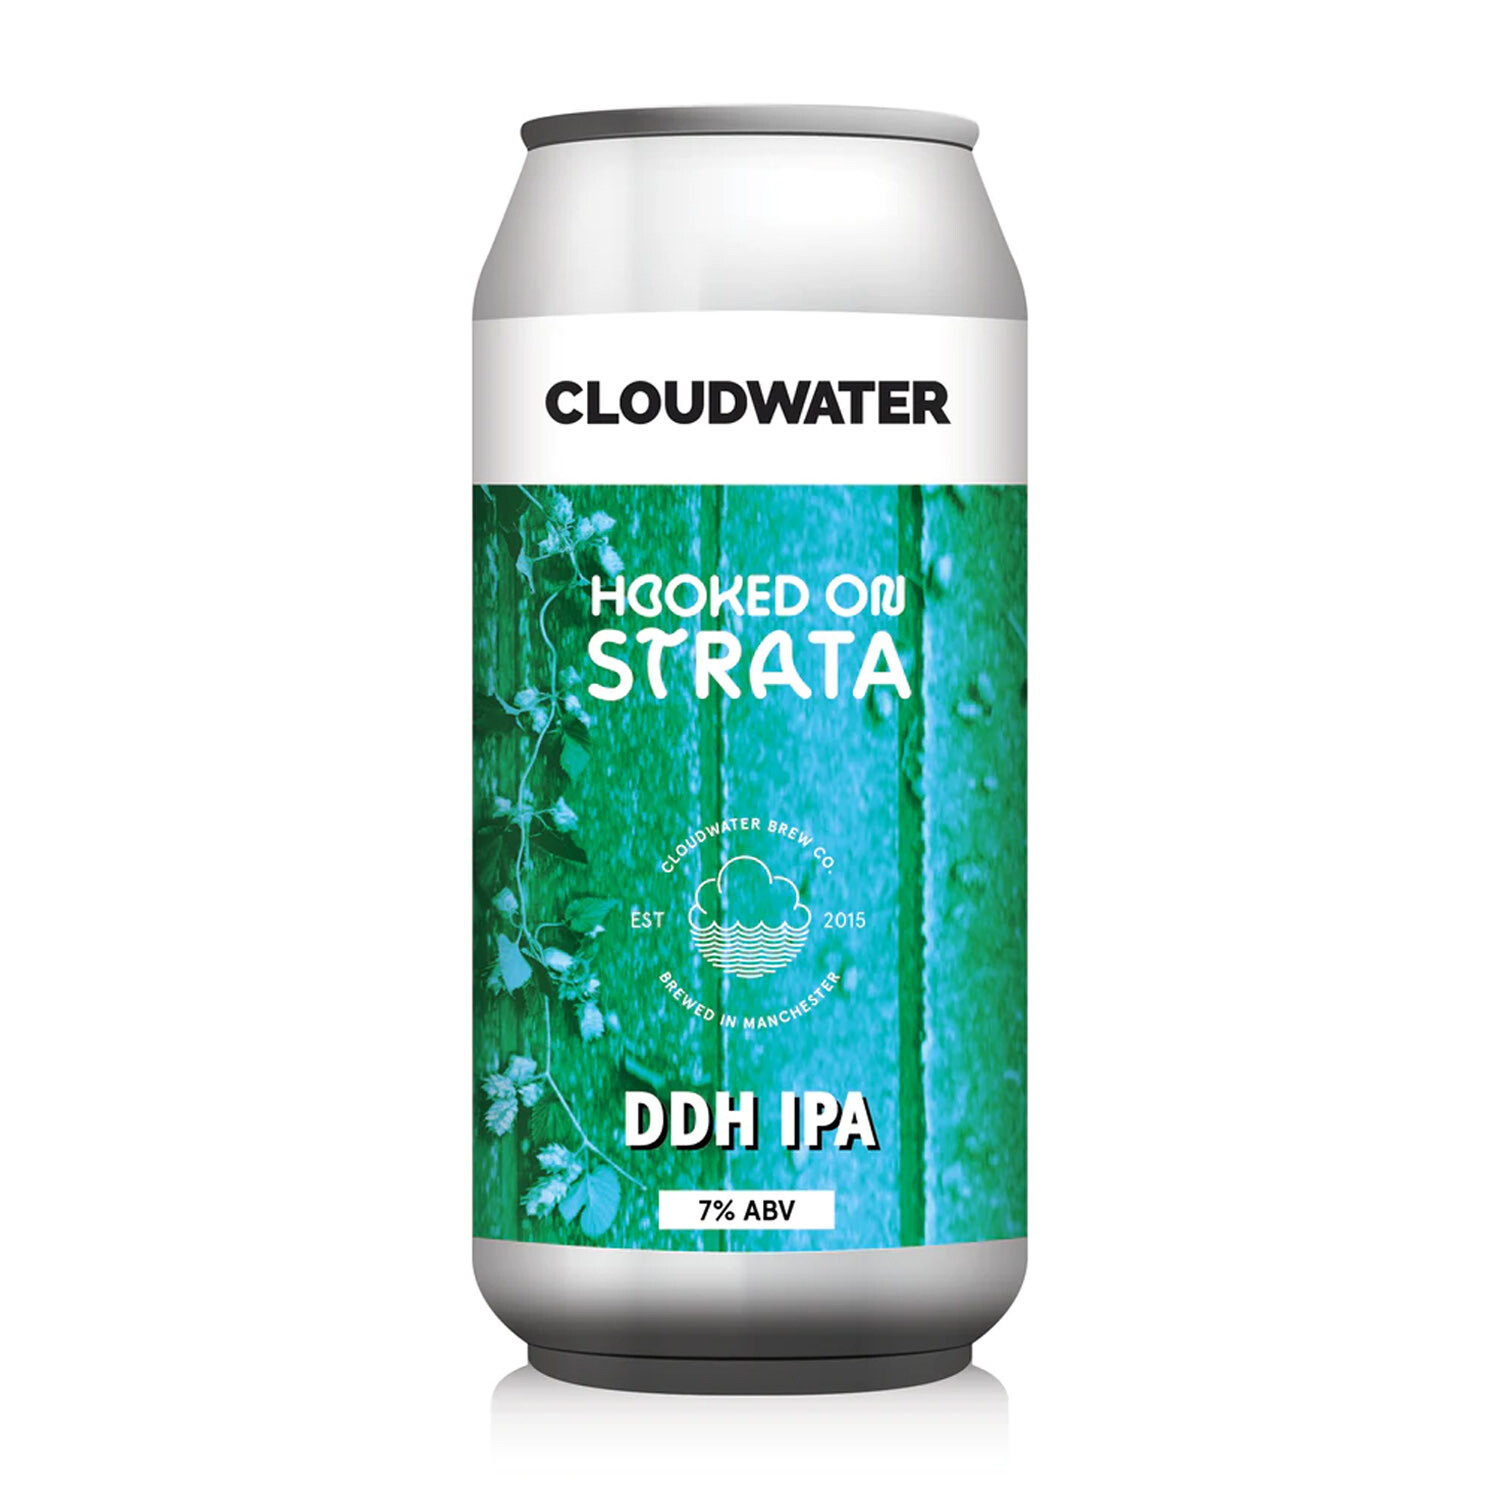 Cloudwater Hooked On Strata DDH IPA